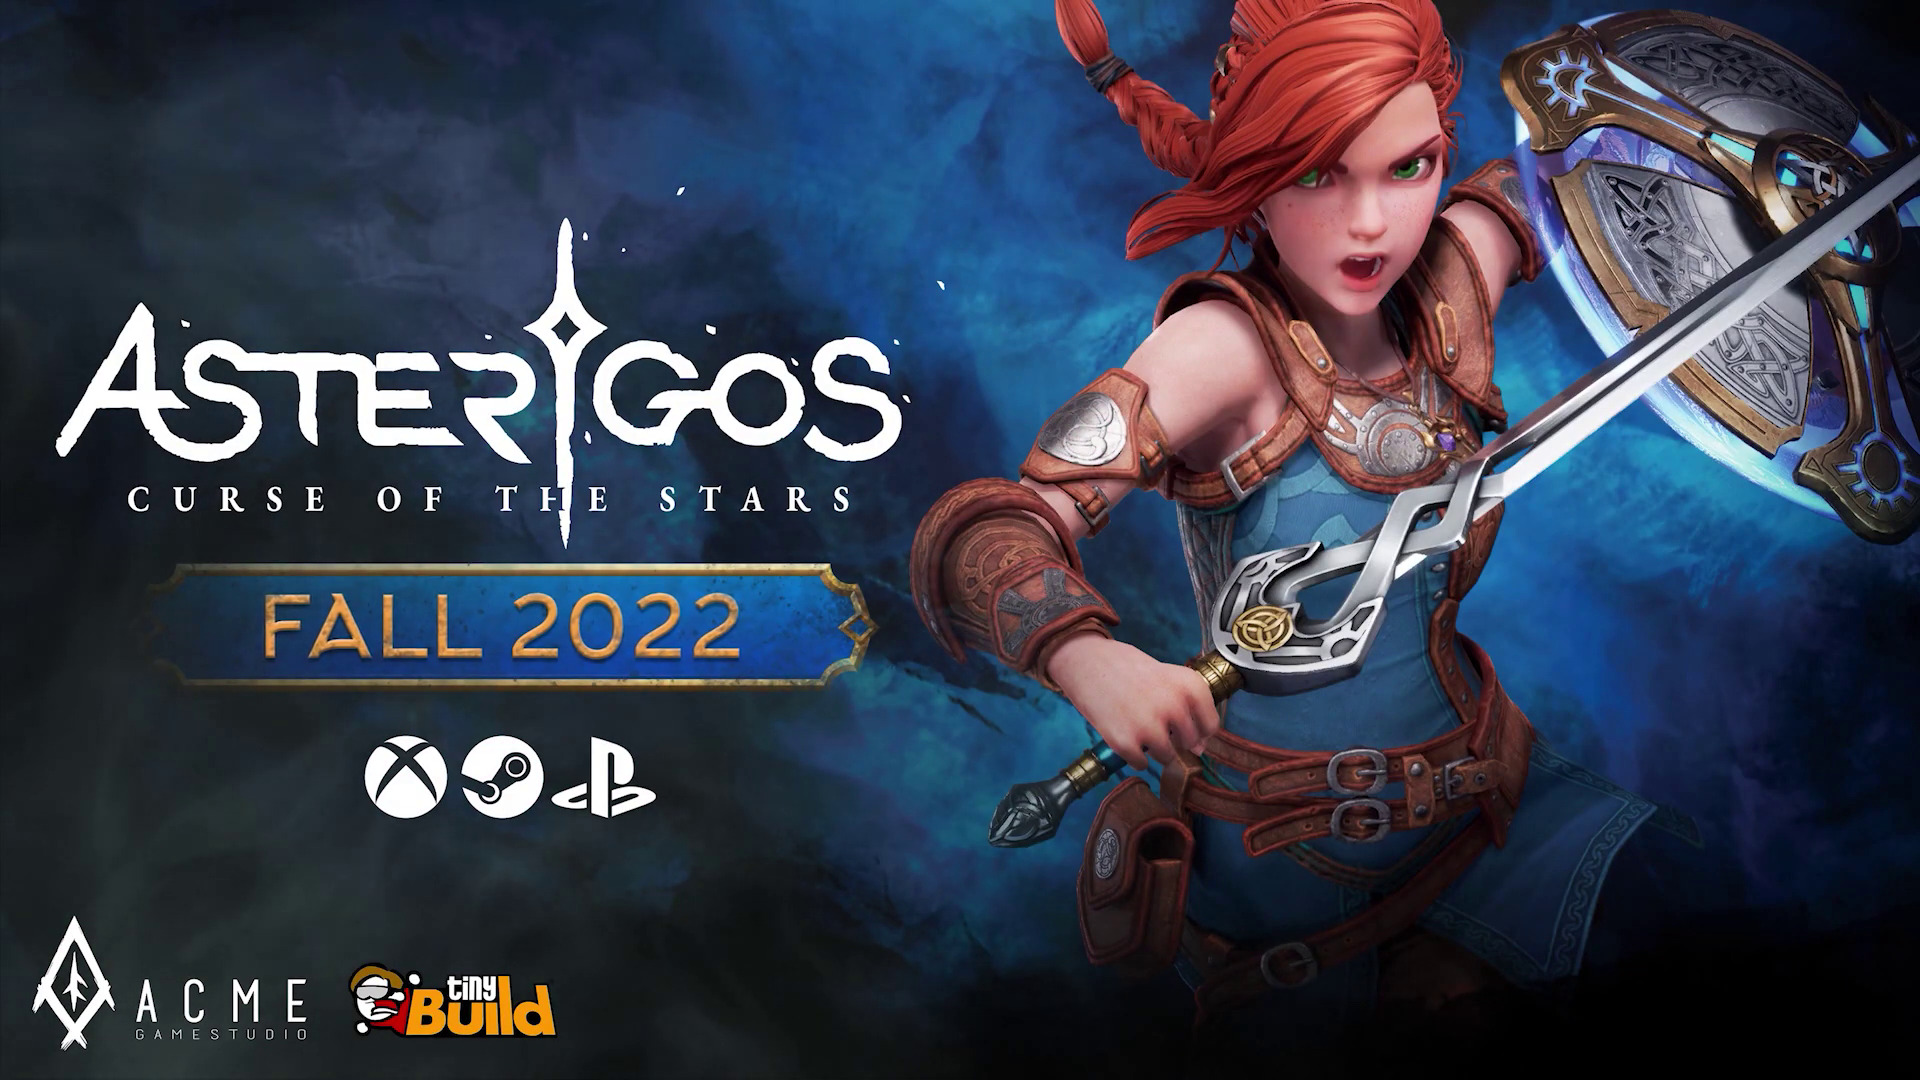 Asterigos: Curse of the Stars instal the new for mac